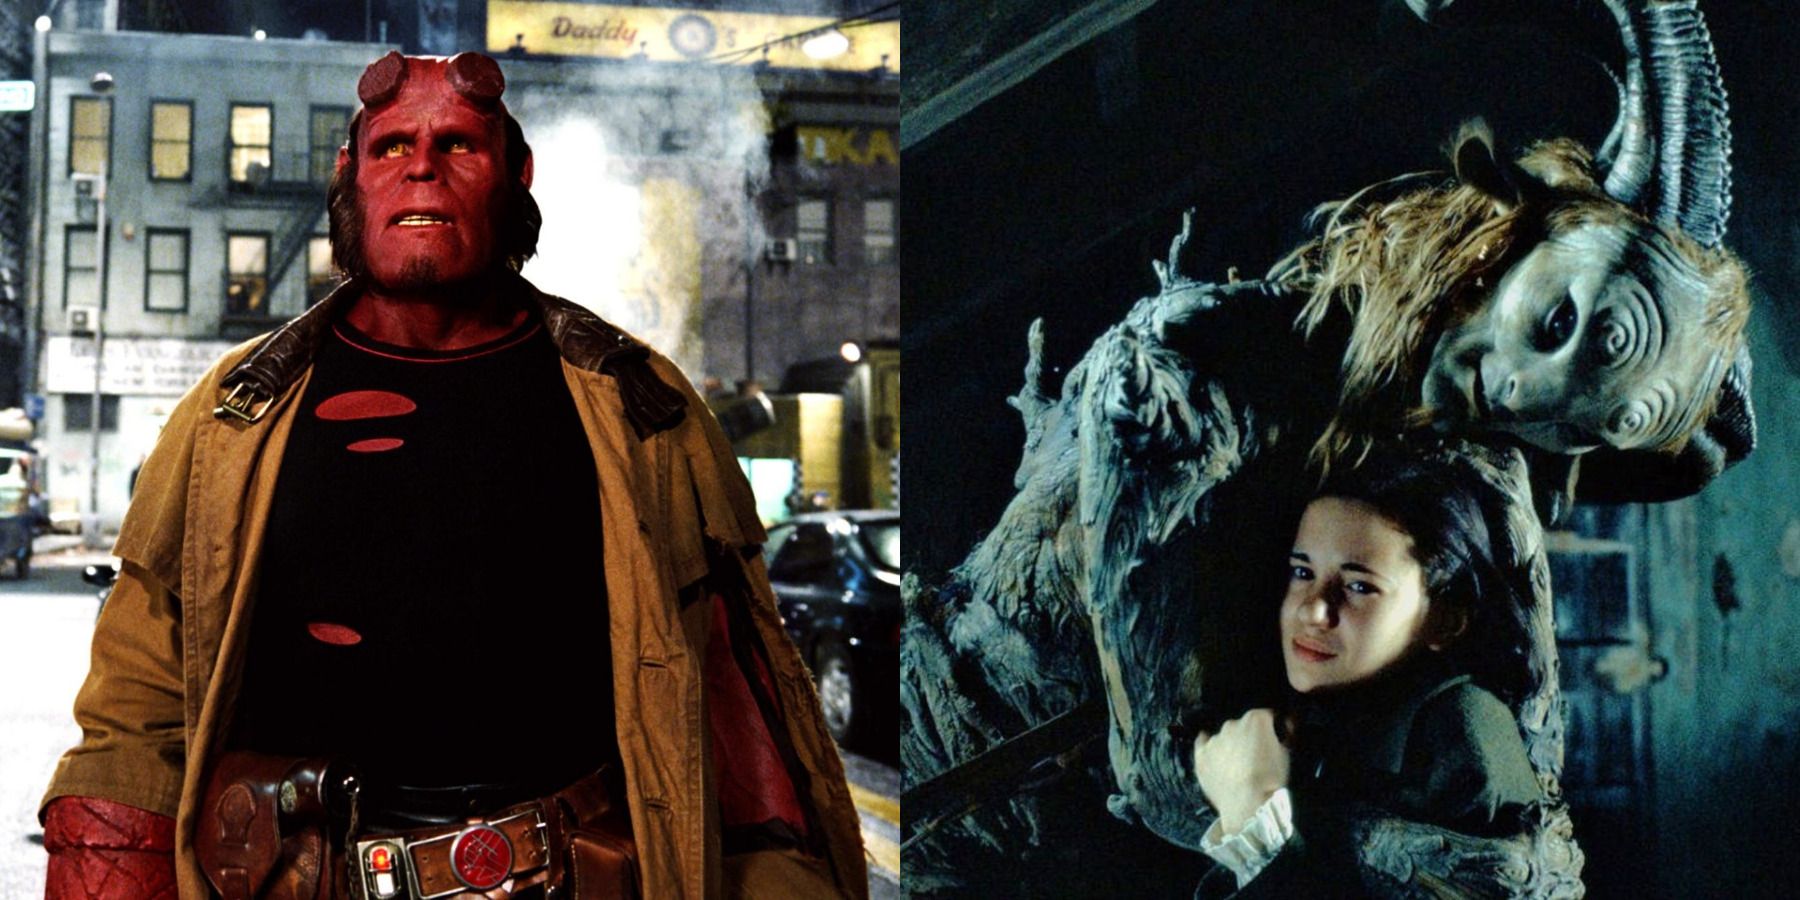 Guillermo del Toro movies feature split image Hellboy 2 and Pan's Labyrinth